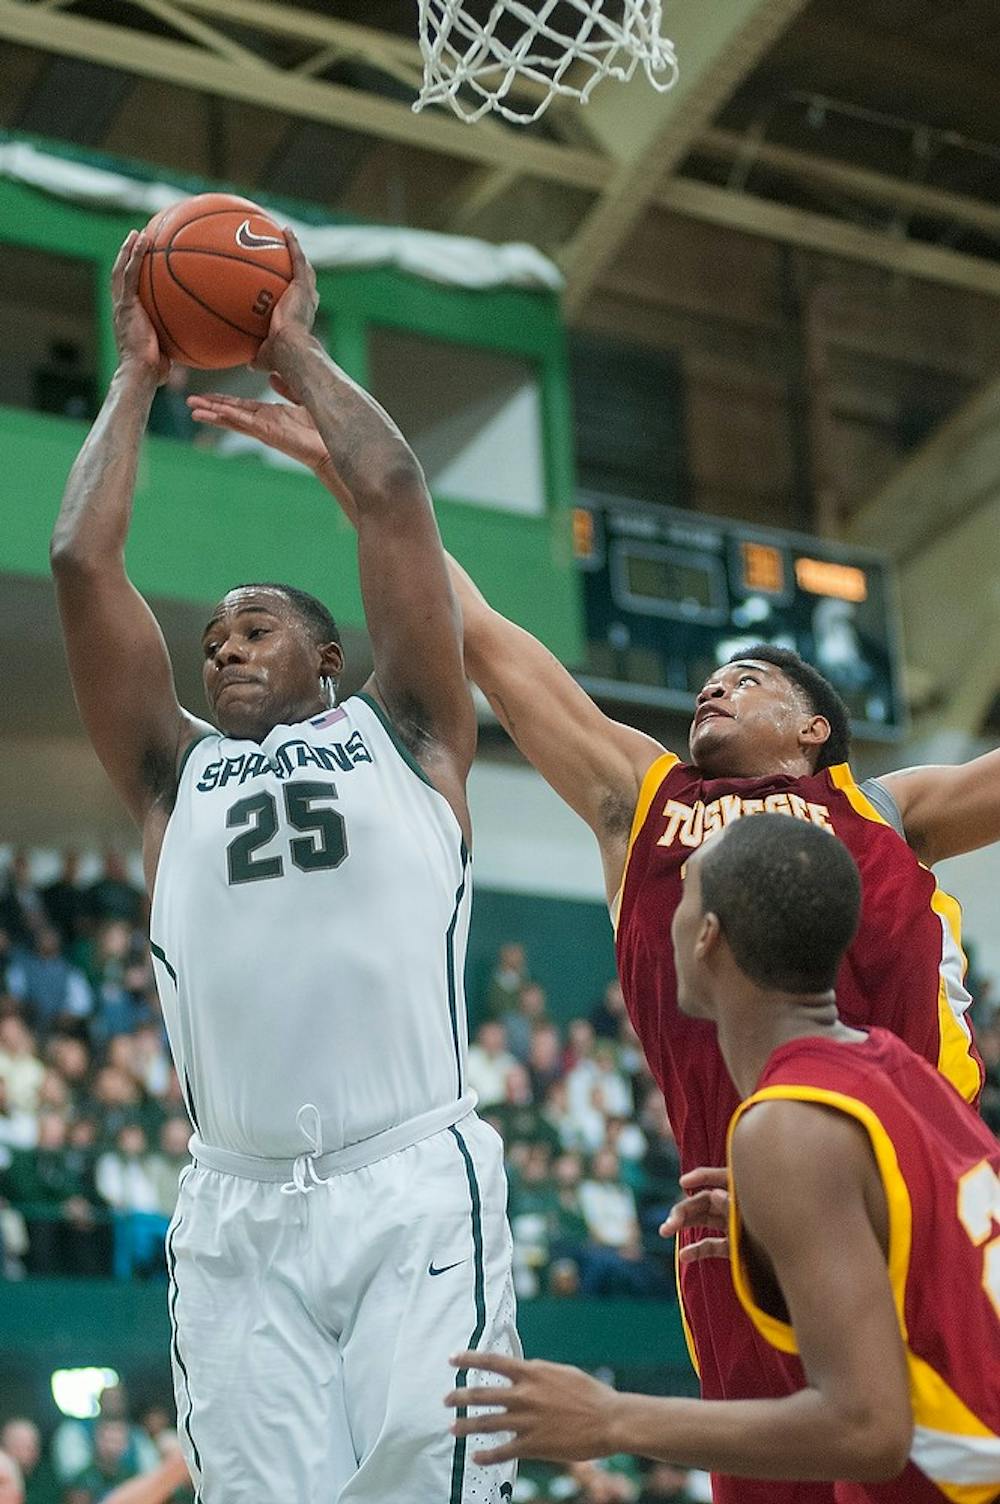 	<p>Senior center Derrick Nix goes up to get a defensive rebound in the second half of the game. The Spartans defeated the Golden Tigers, 92-56, Saturday, Dec. 15, 2012, at Jenison Field House. Justin Wan/The State News</p>